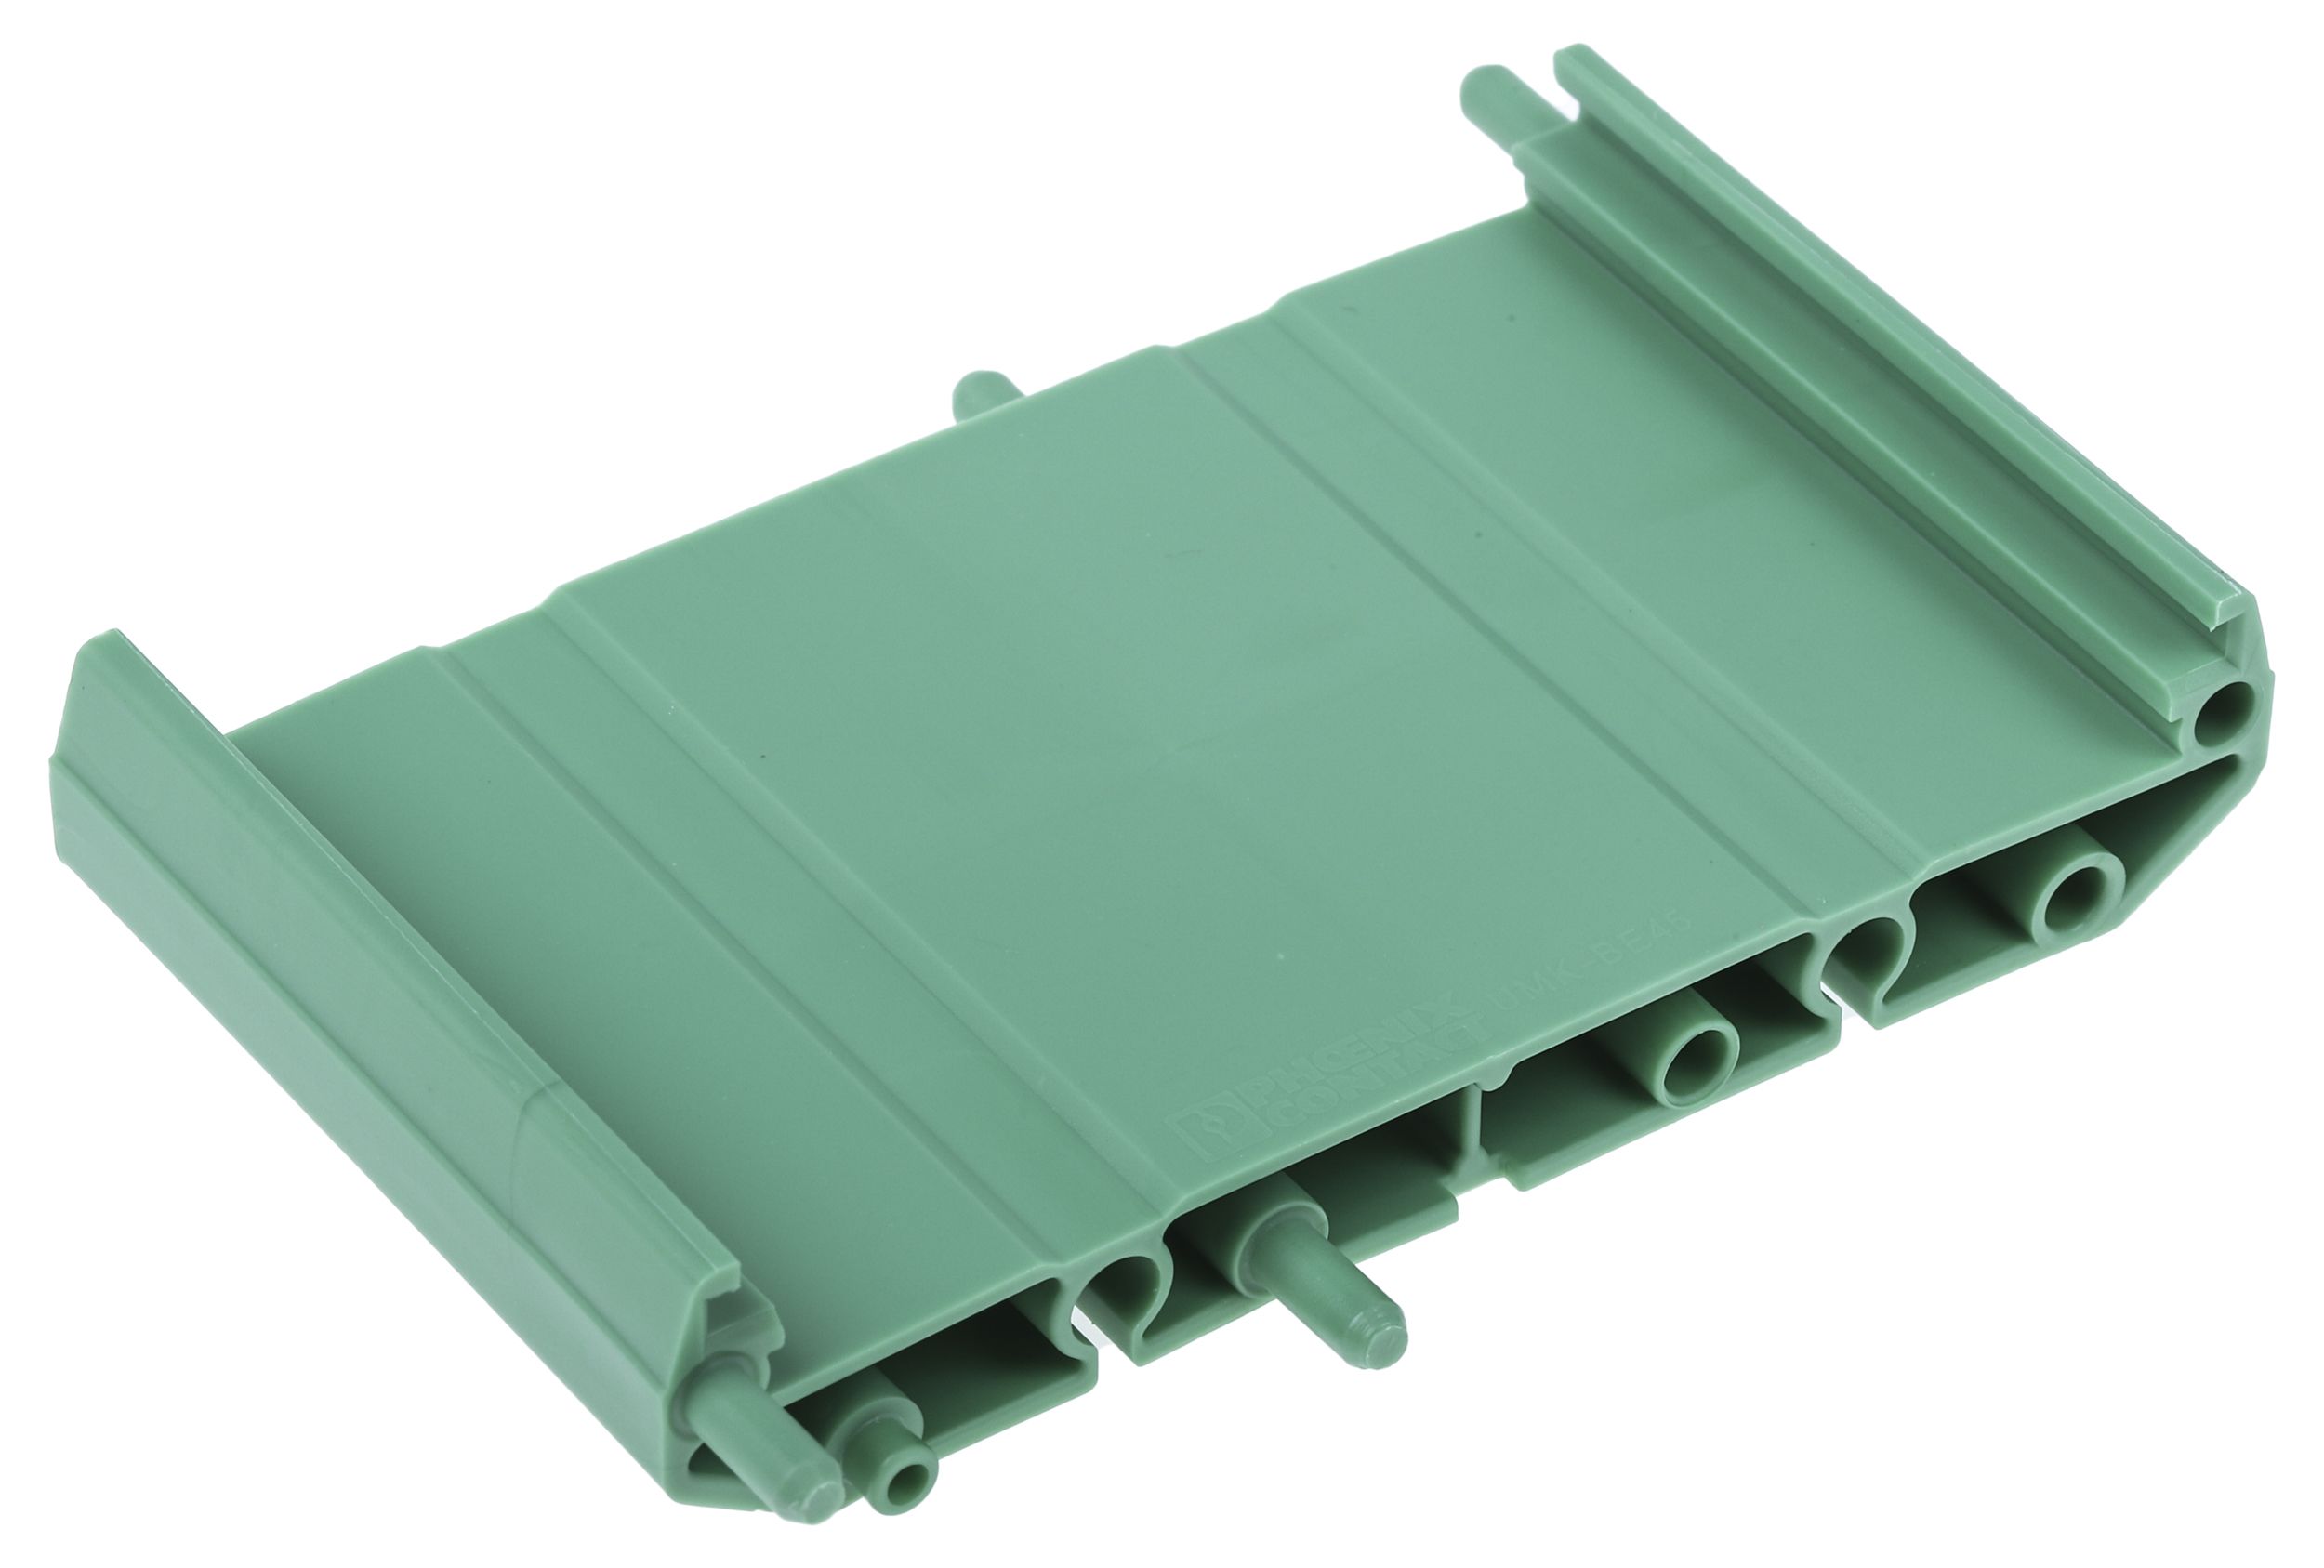 Phoenix Contact UMK- BE 45 Series Electronic Board Base for Use with DIN Rail Terminal Blocks